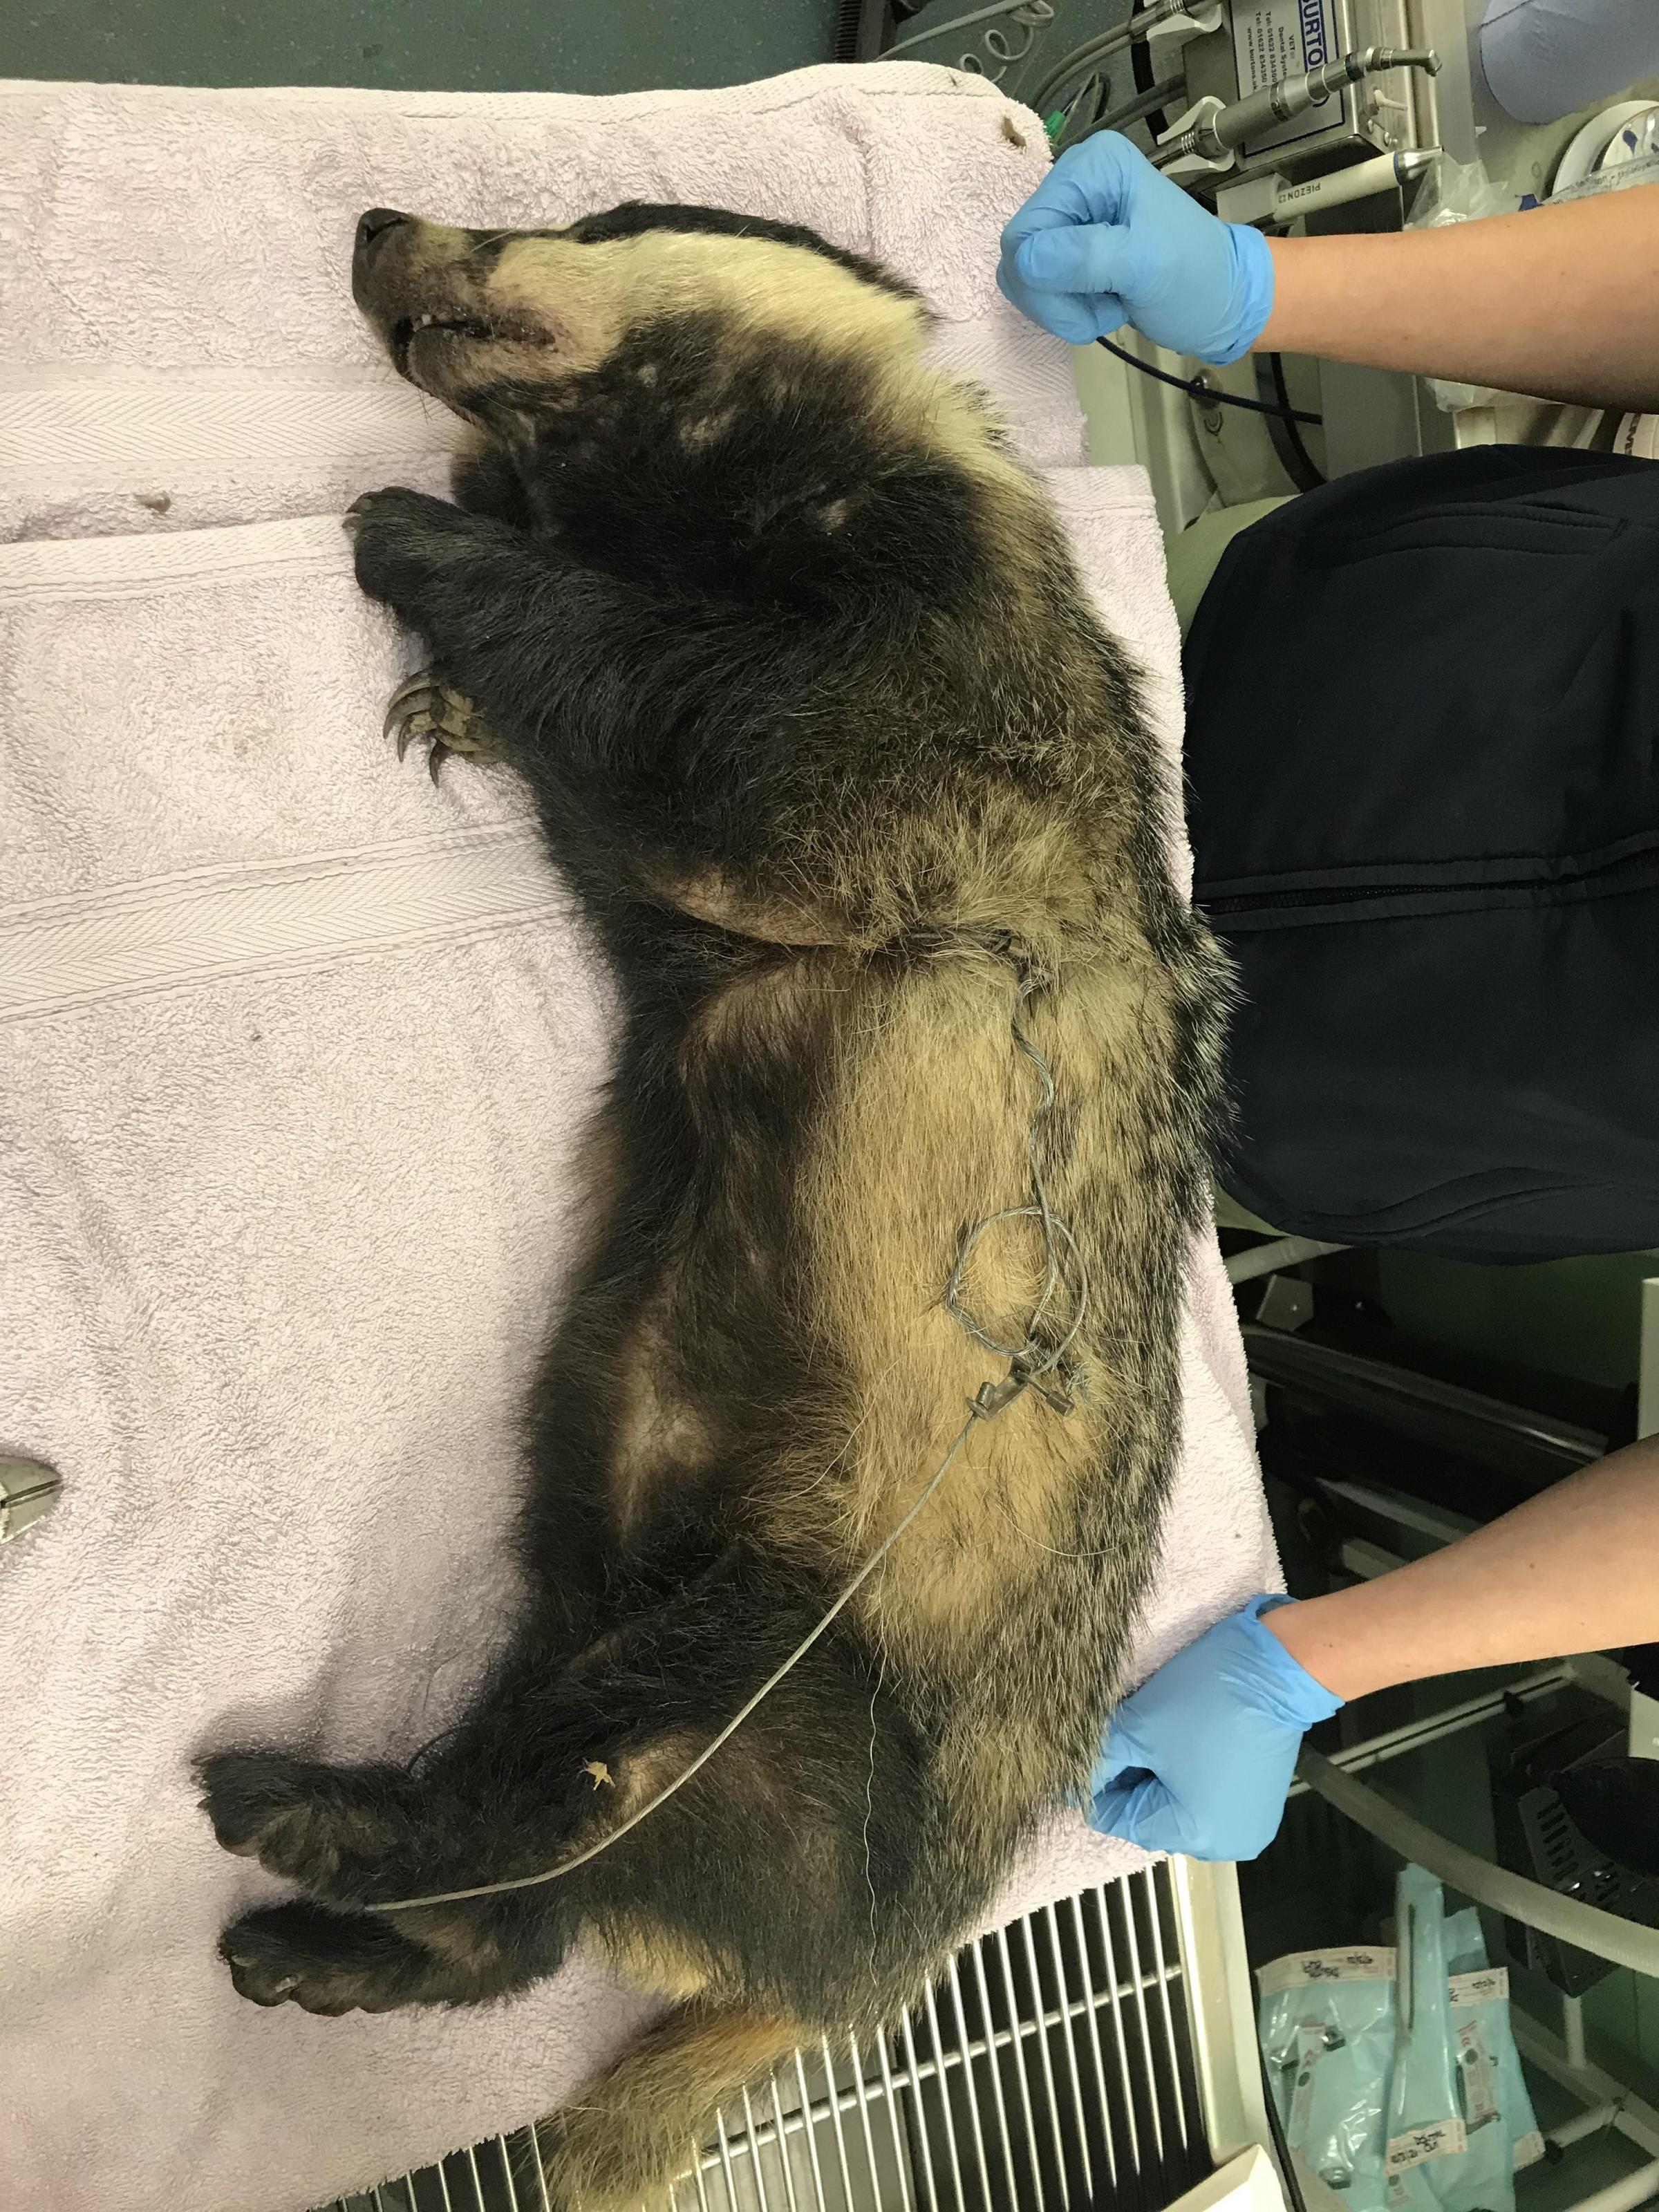 The badger was spotted struggling amid shrubs and hedgerow - before an RSPCA officer found that the wild animal had become trapped by a snare. Picture: RSPCA